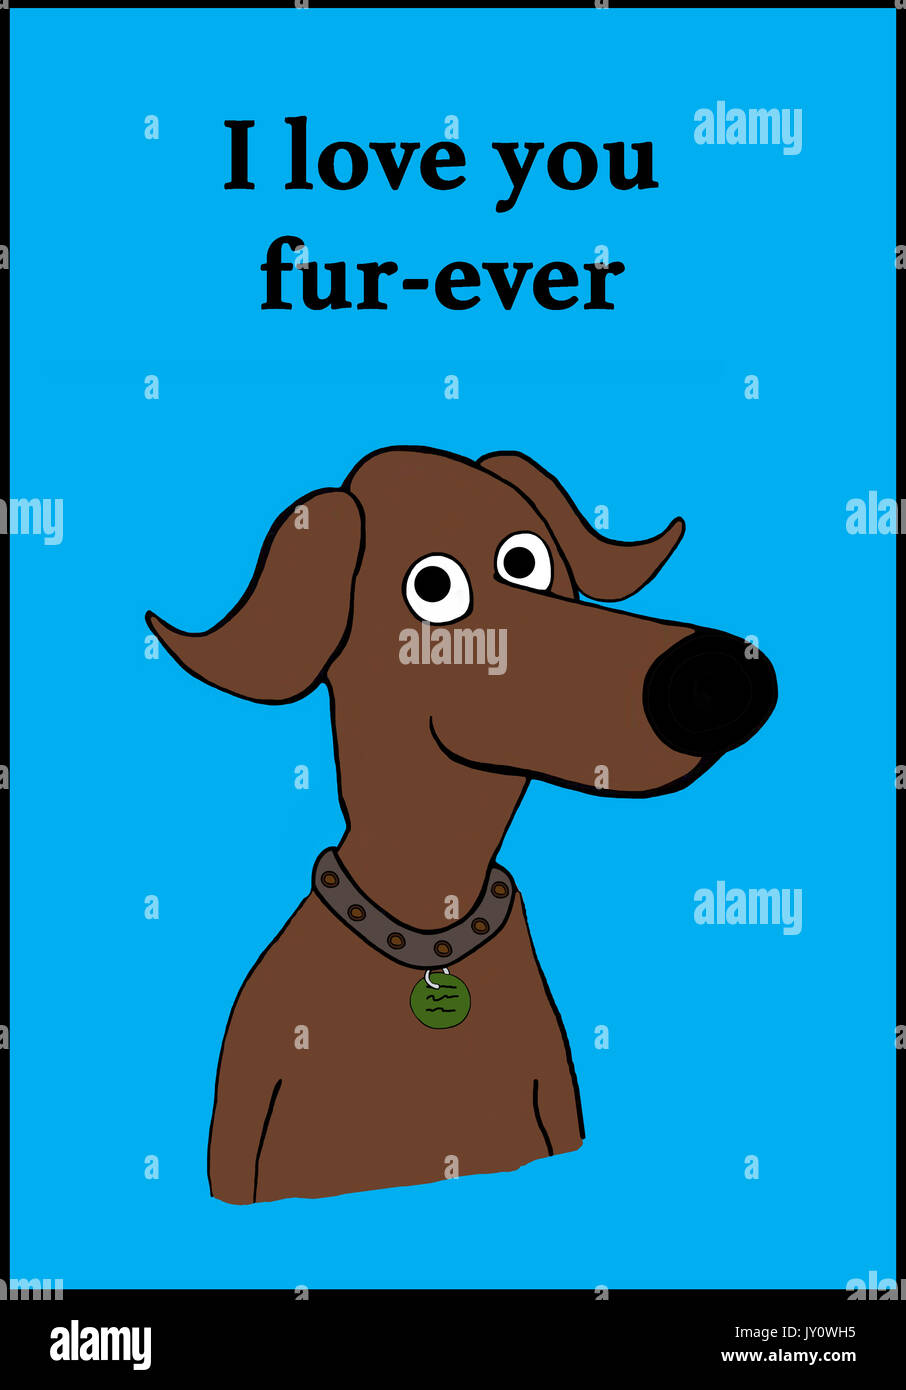 Cartoon illustration of a smiling dog and a pun about love. Stock Photo